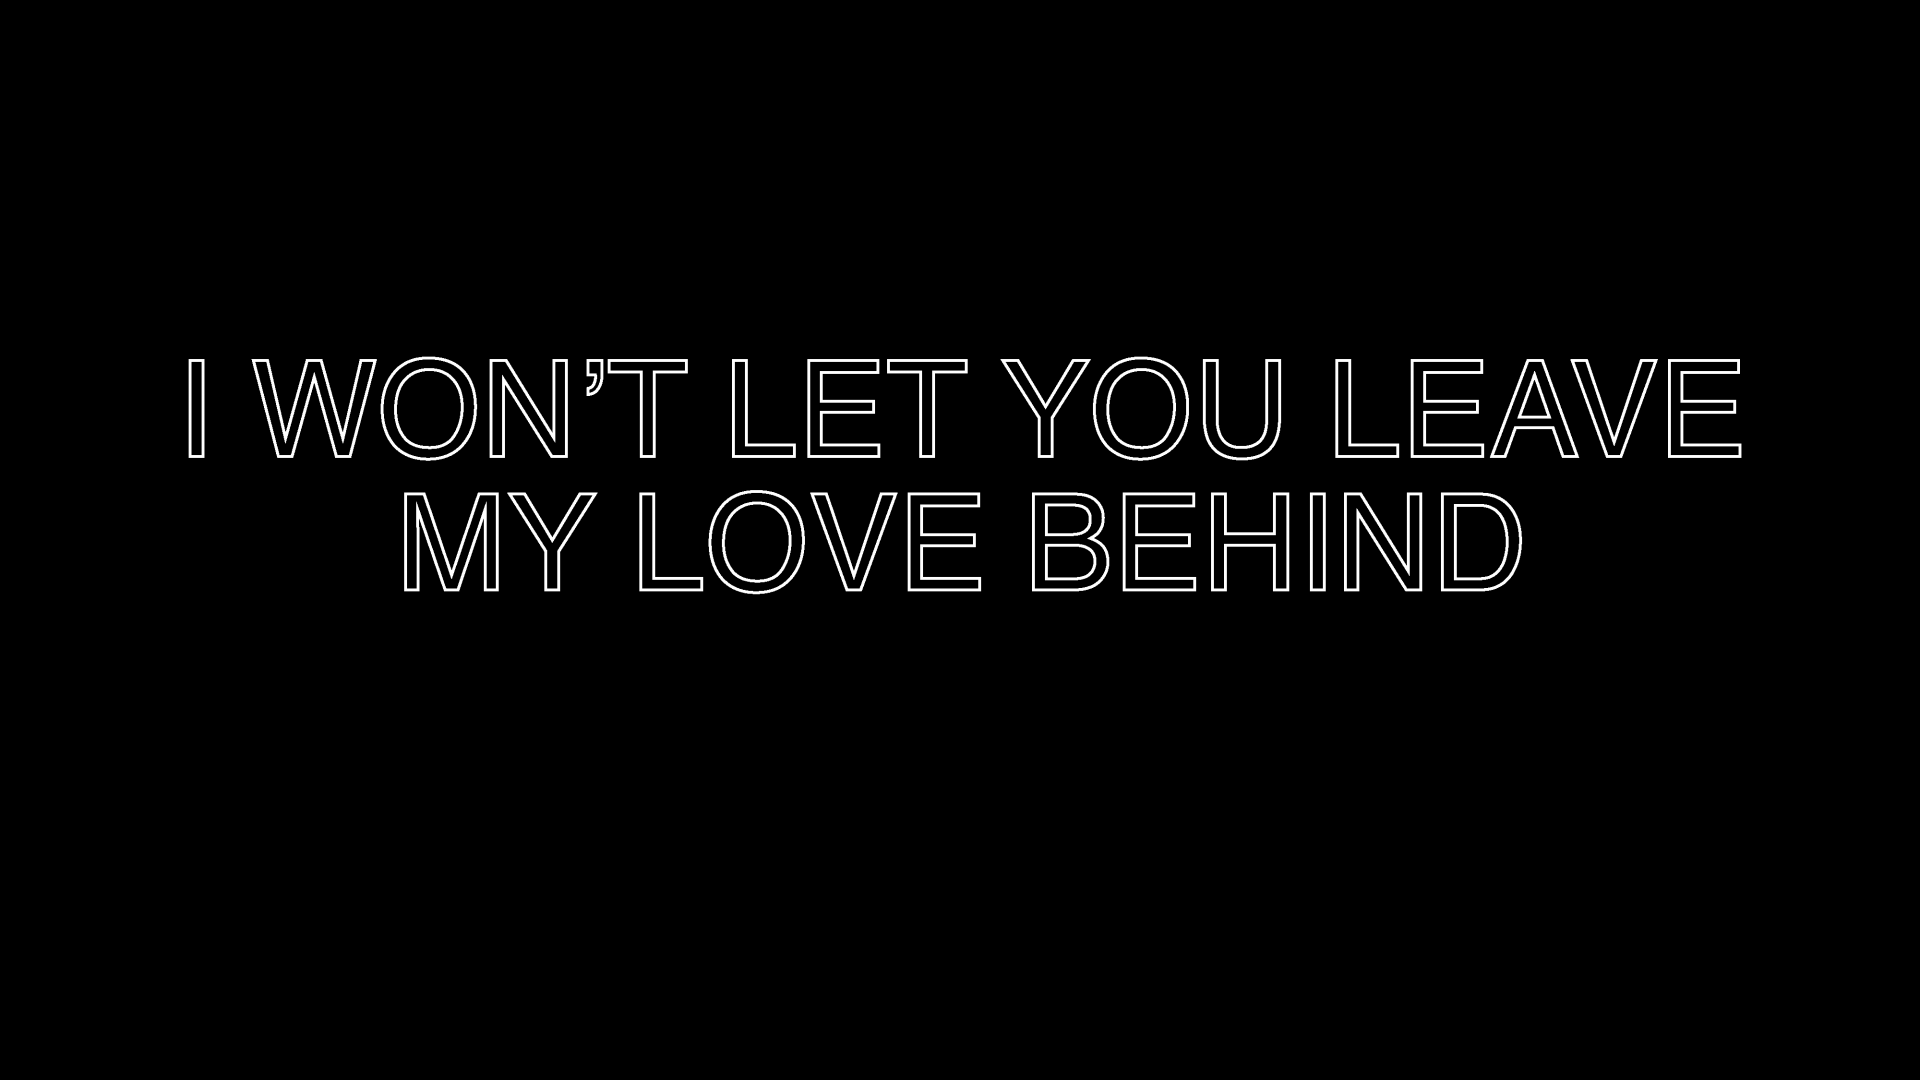 I Won't Let You Leave My Love Behind title card. White letters on black background reminiscent of the poster from the 1982 film Poltergeist.